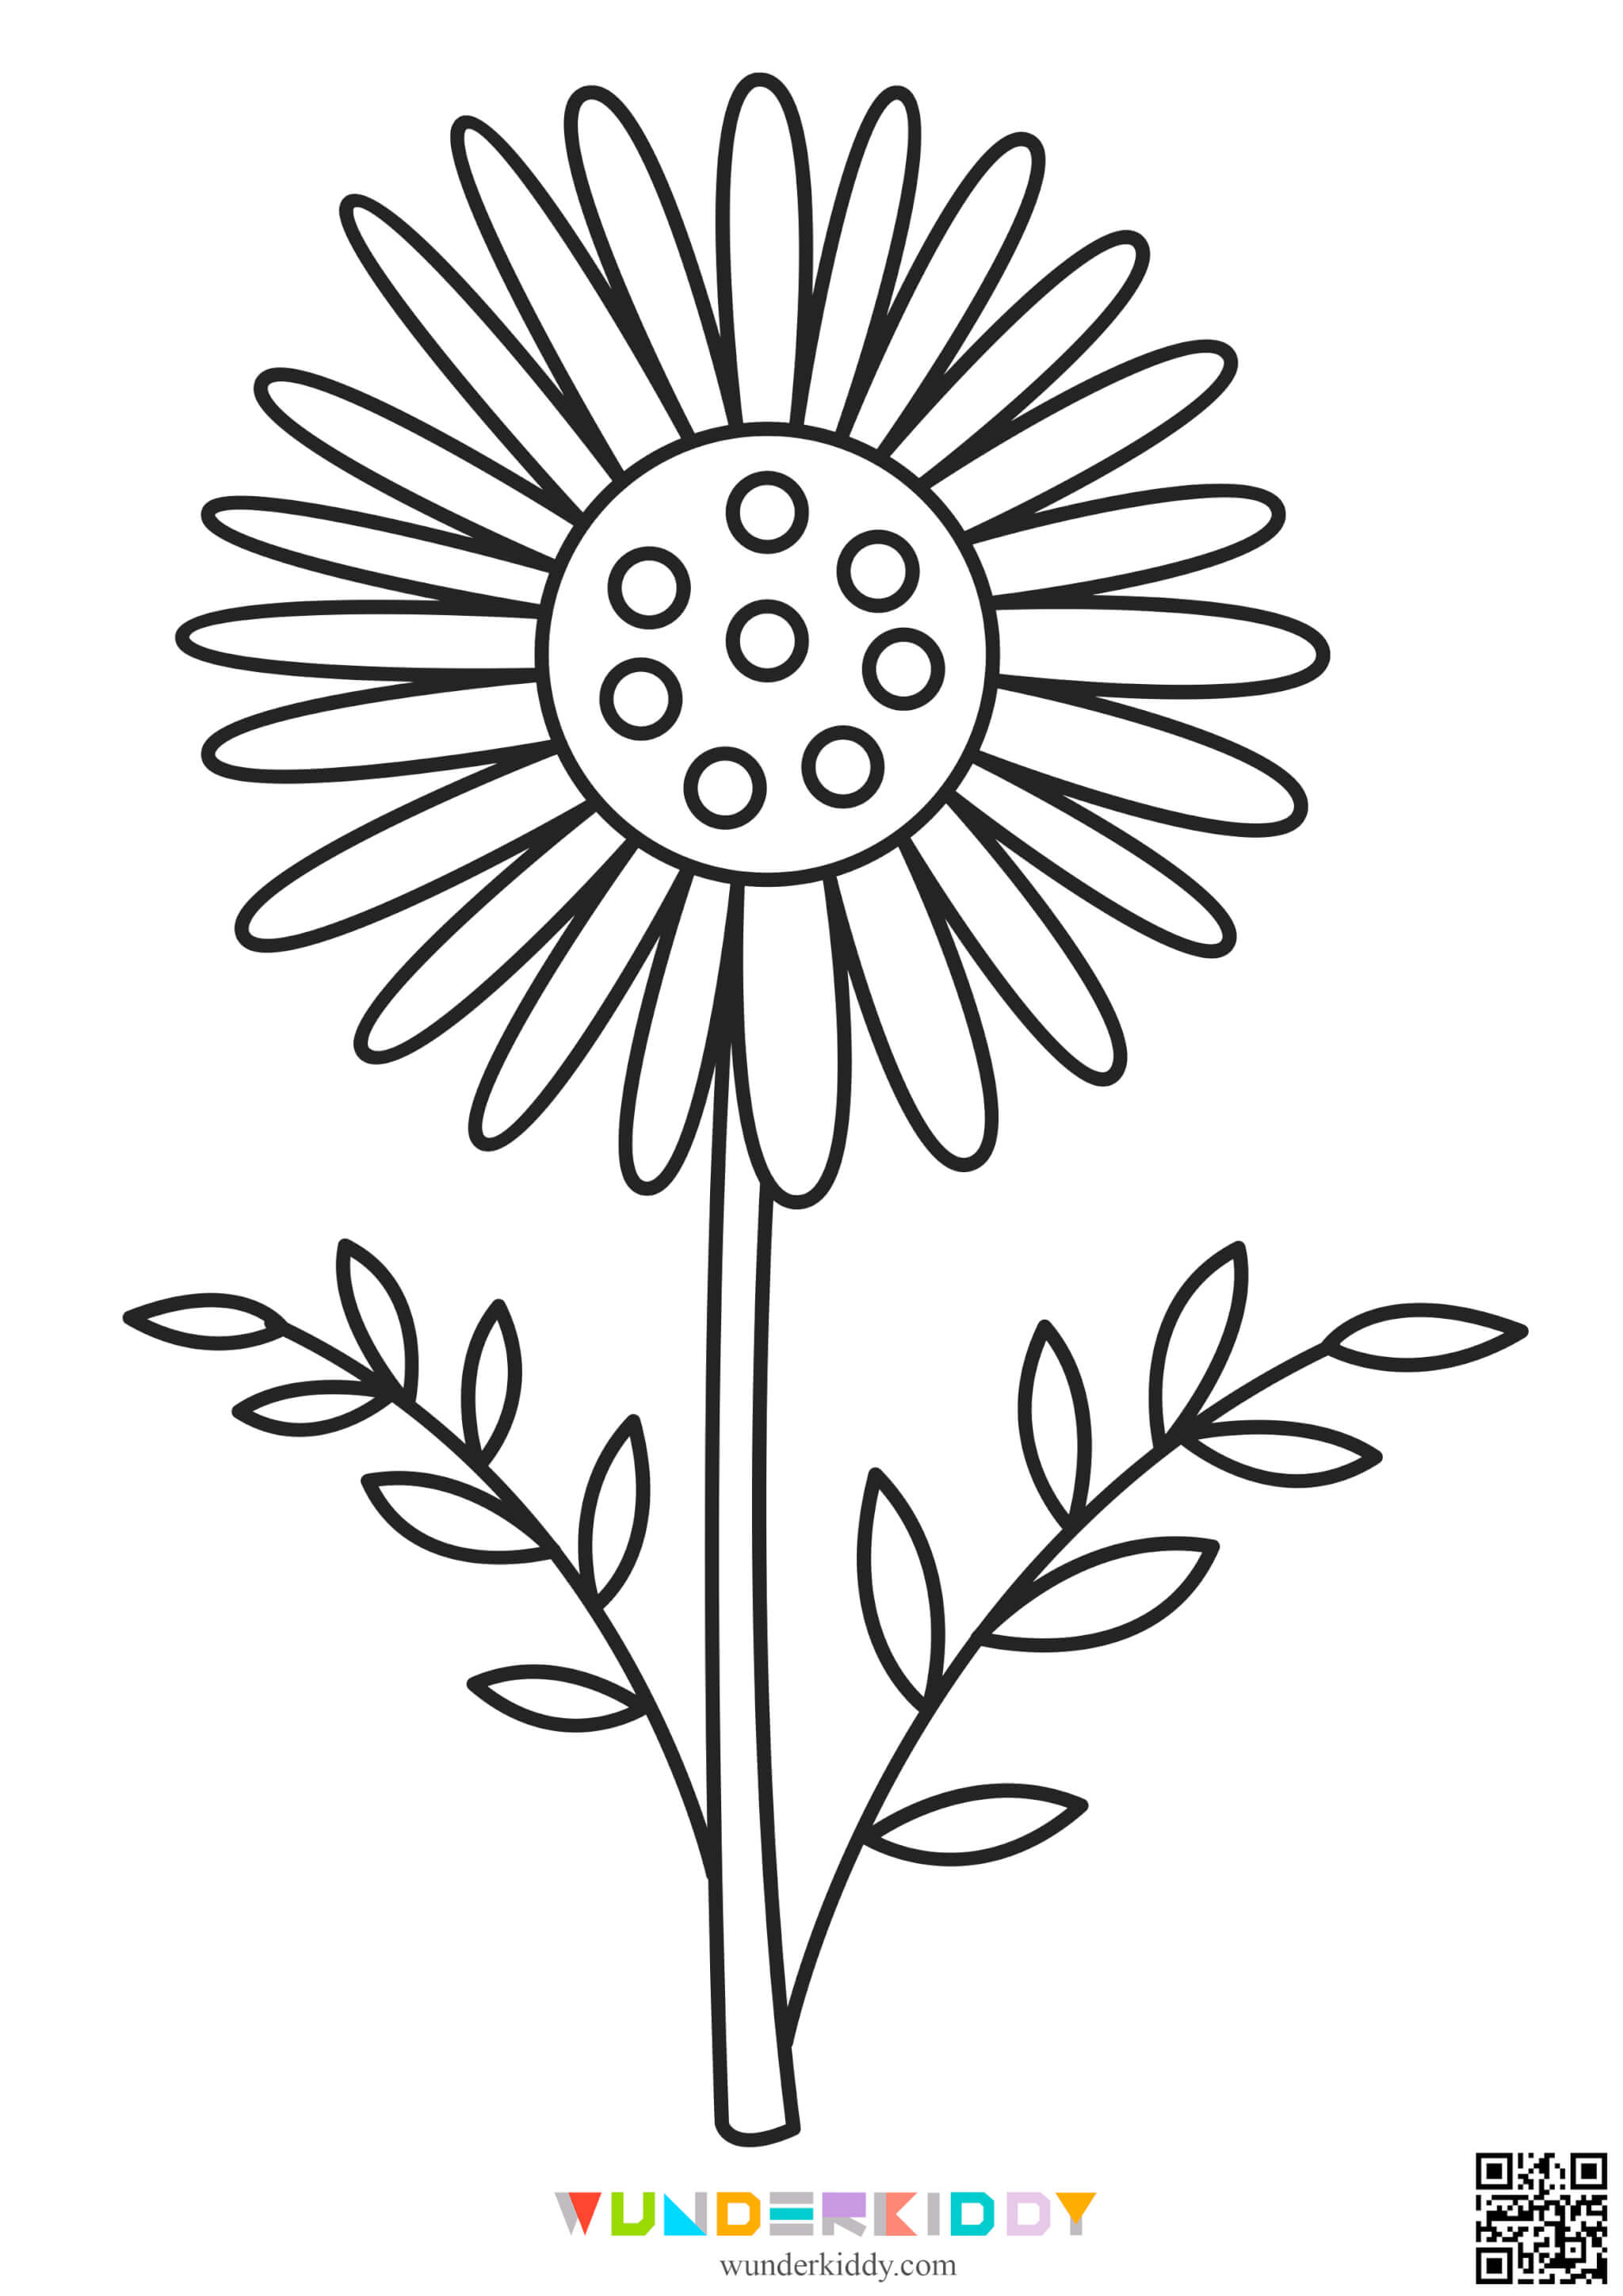 Flower Printable Coloring Pages - Image 24